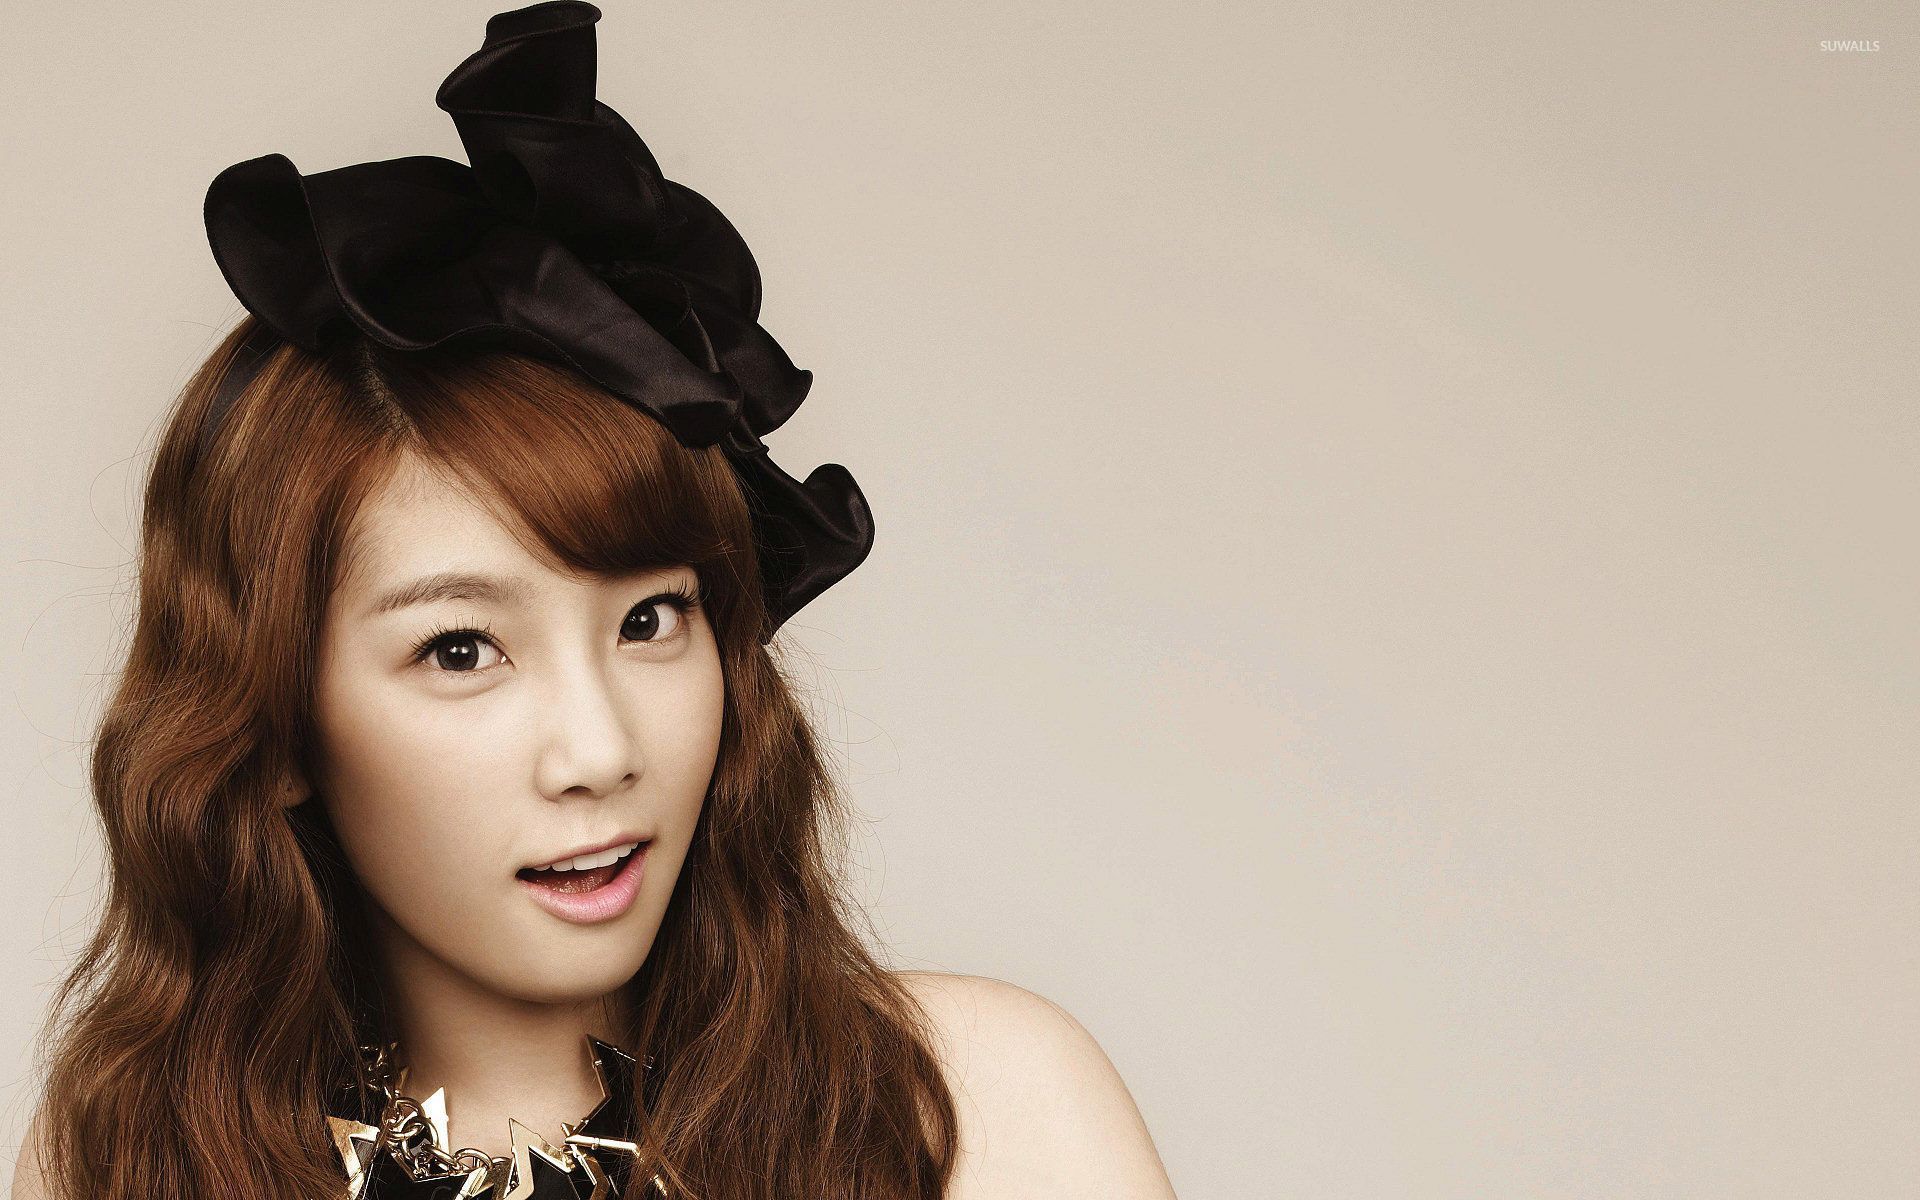 Kim Tae Yeon With A Black Hat Wallpaper Celebrity Wallpapers Images, Photos, Reviews